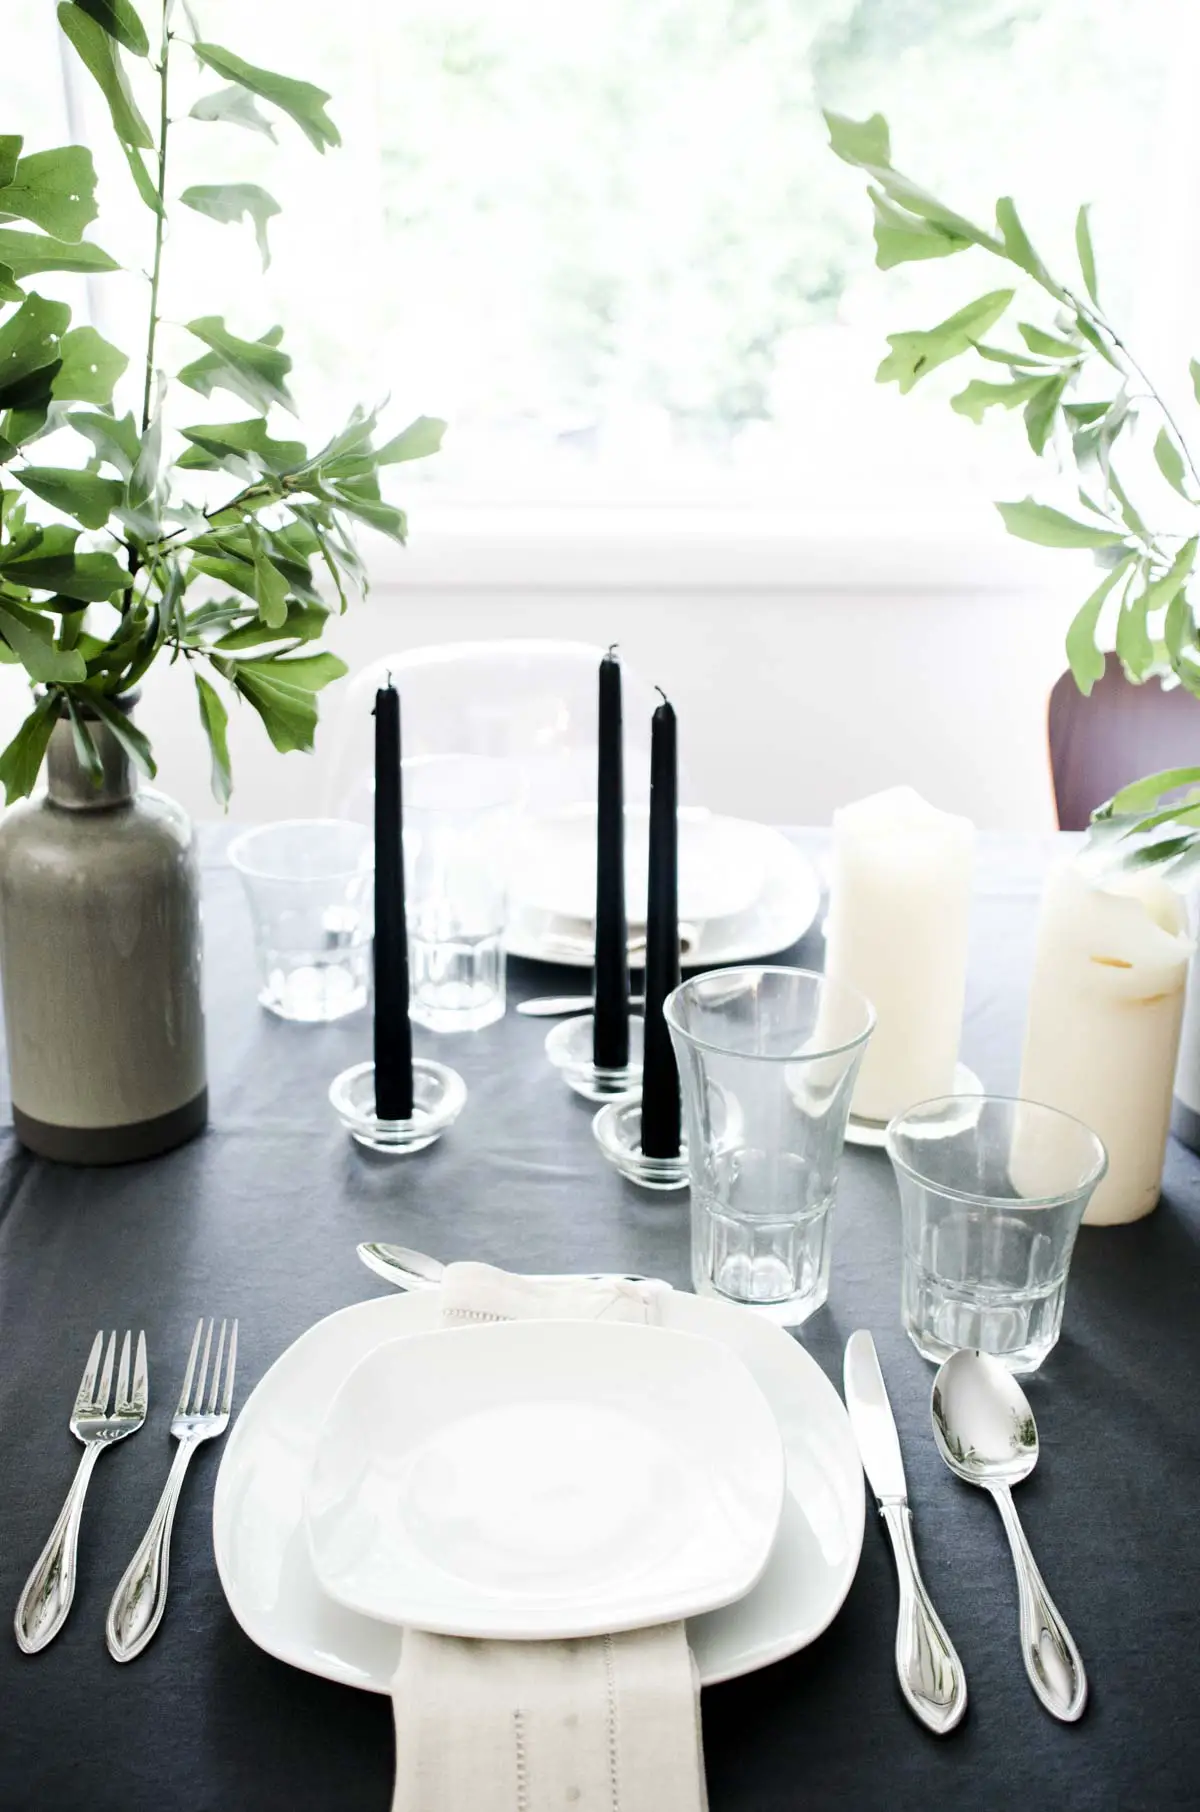 Scandinavian-inspired black, white, and grey summer table setting with simple green arrangements via @thouswellblog